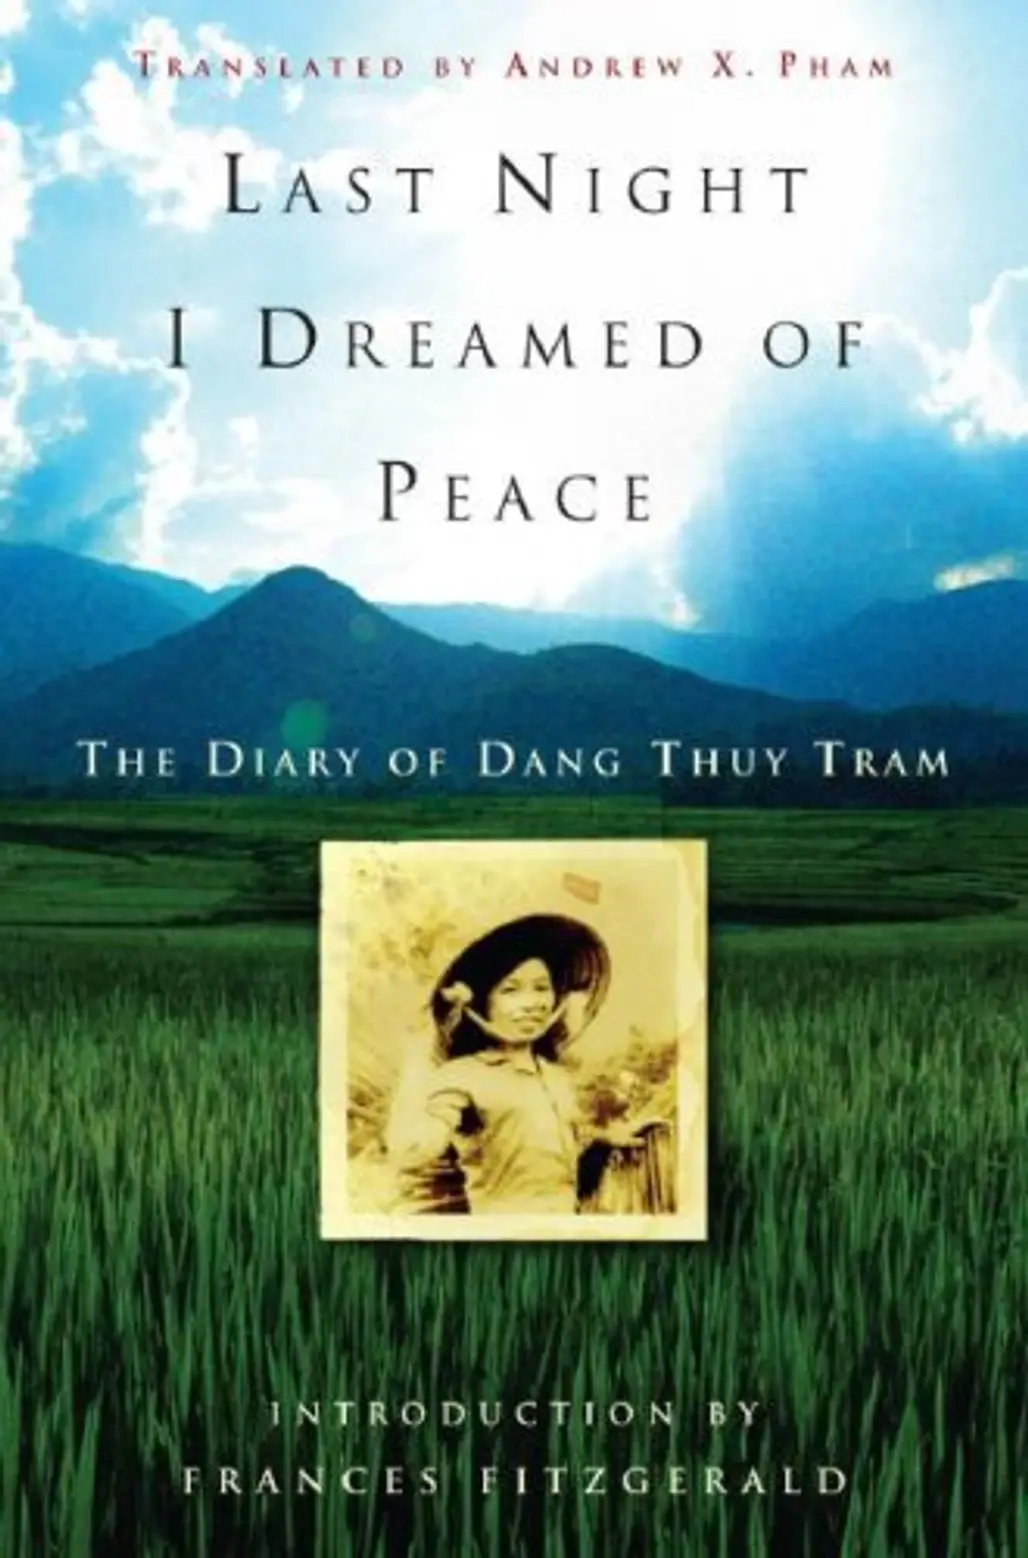 “Last Night I Dreamed of Peace: the Diary of Dang Thuy Tram” by Dang Thuy Tram